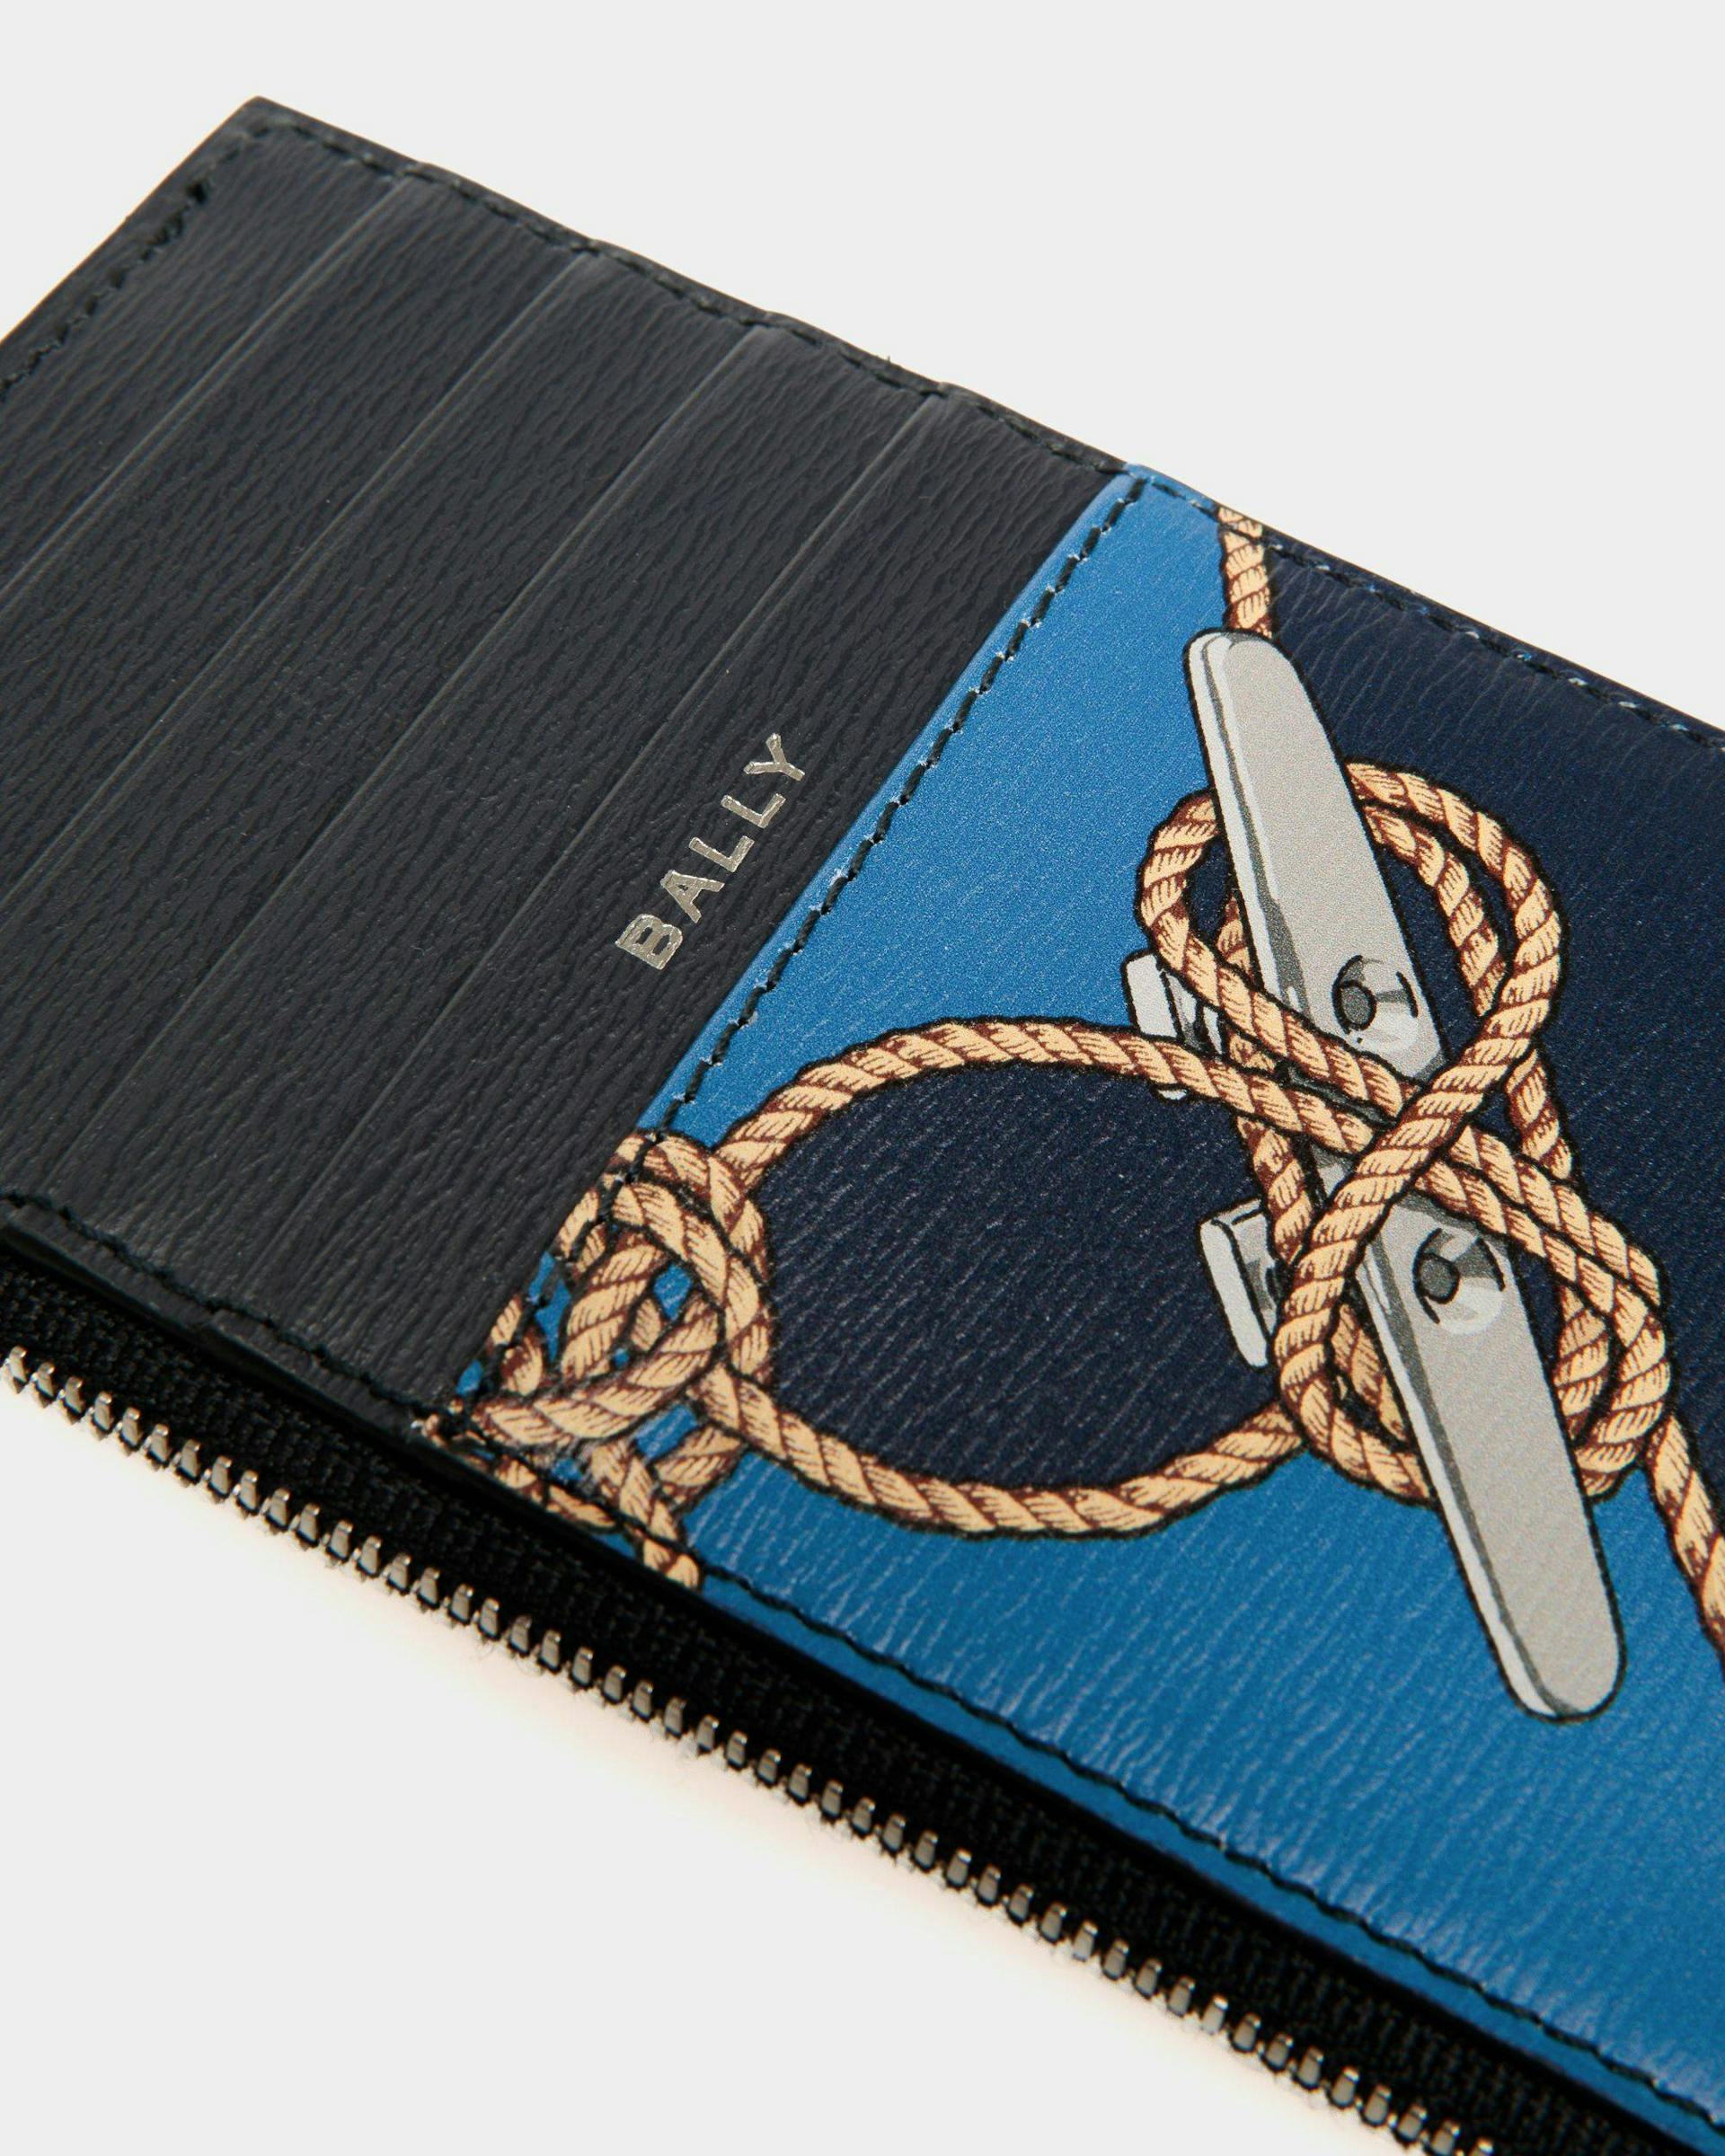 Men's Crossing Coin & Card Holder in Blue Leather | Bally | Still Life Detail